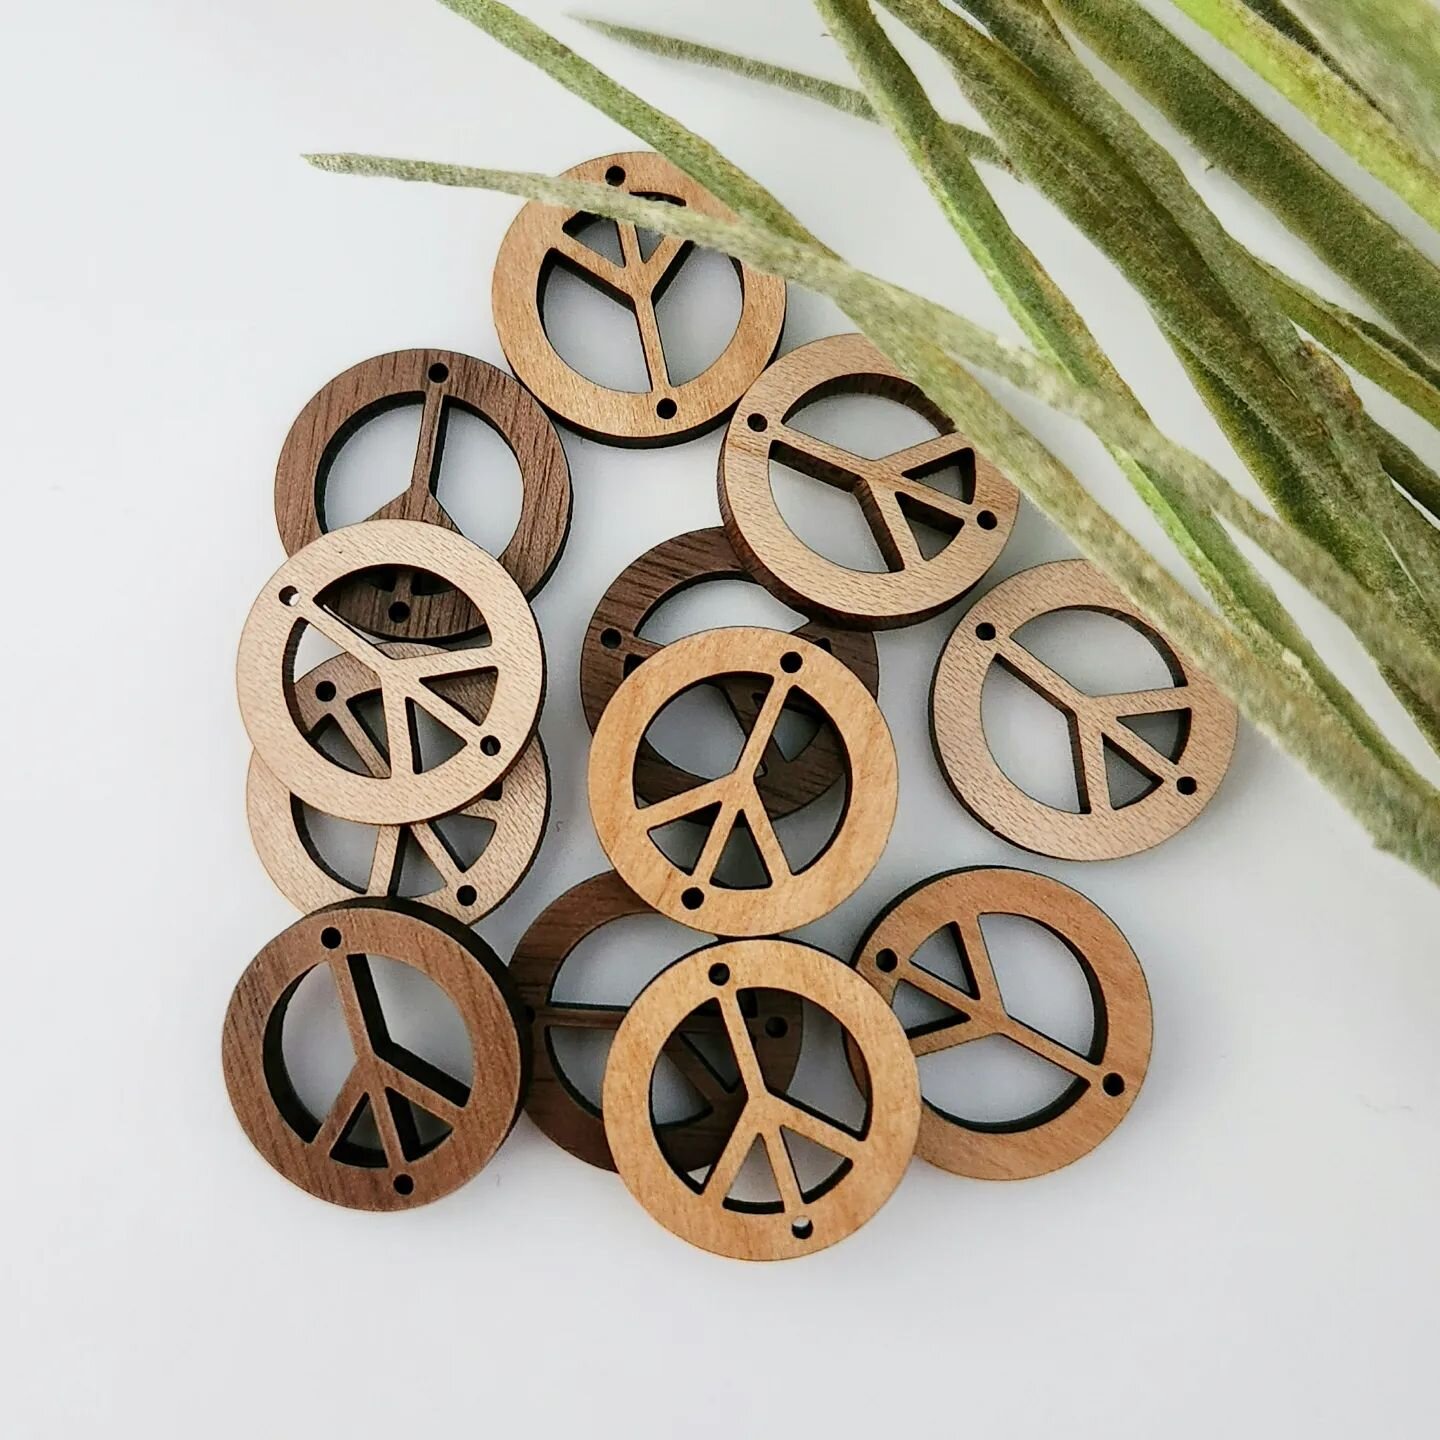 Itty bitty baby peace sign connectors ✌️
Up in the shop.

#studs #earrings #earringstuds #earringconnectors #jewelryconnector #jewelryconnectors #jewelryconnectorpieces #earringconnector #wholesaleearrings #wholesaleearringblanks #wholesaleearringpar